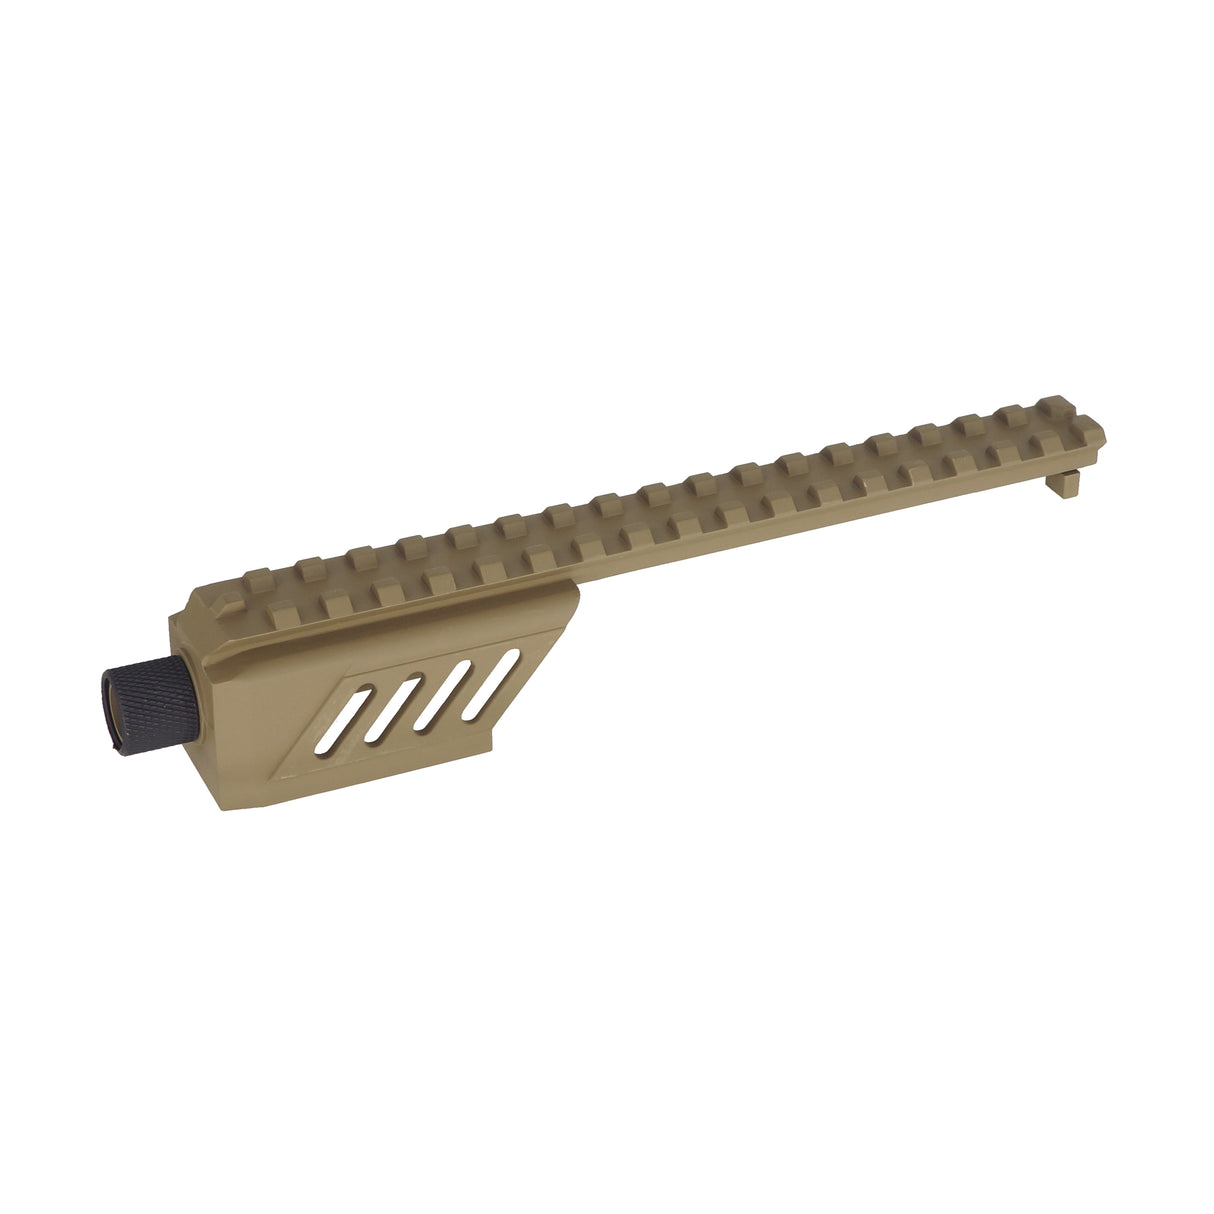 CYMA Tactical Rail with Muzzle Adapter for G18C AEP ( CYMA-C29A ) Tan